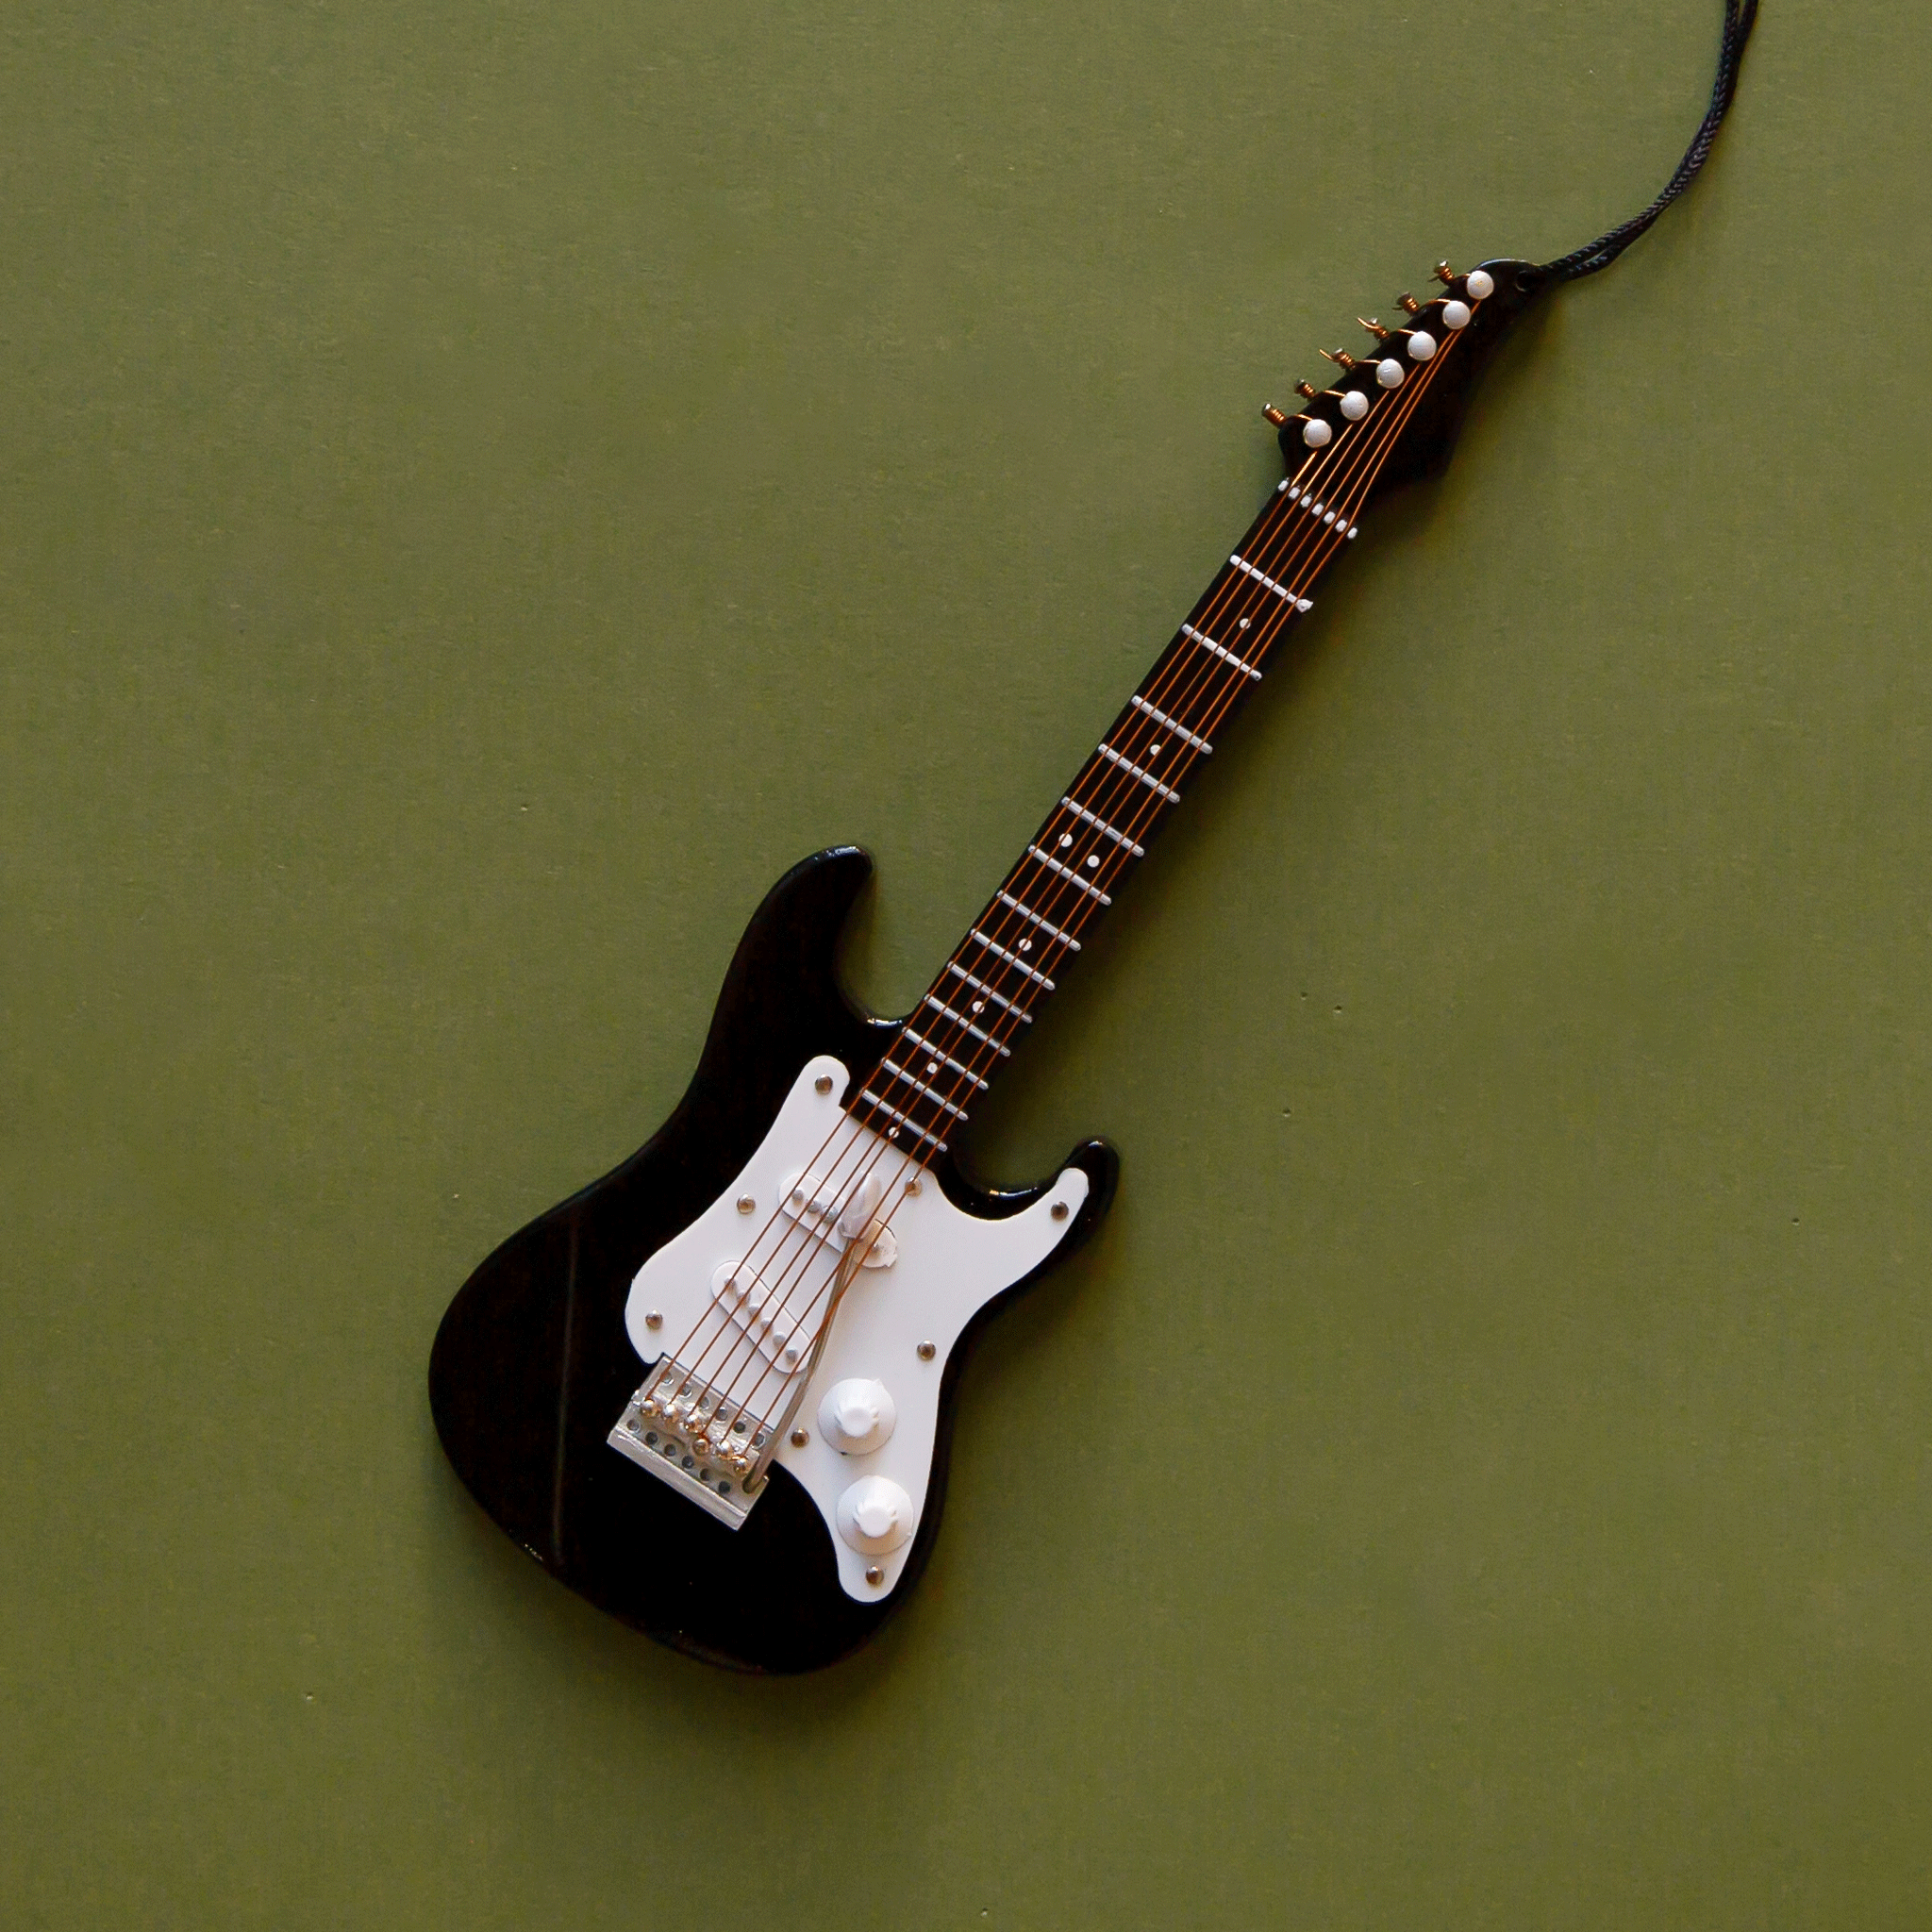 On a green background is a black electric guitar ornament.